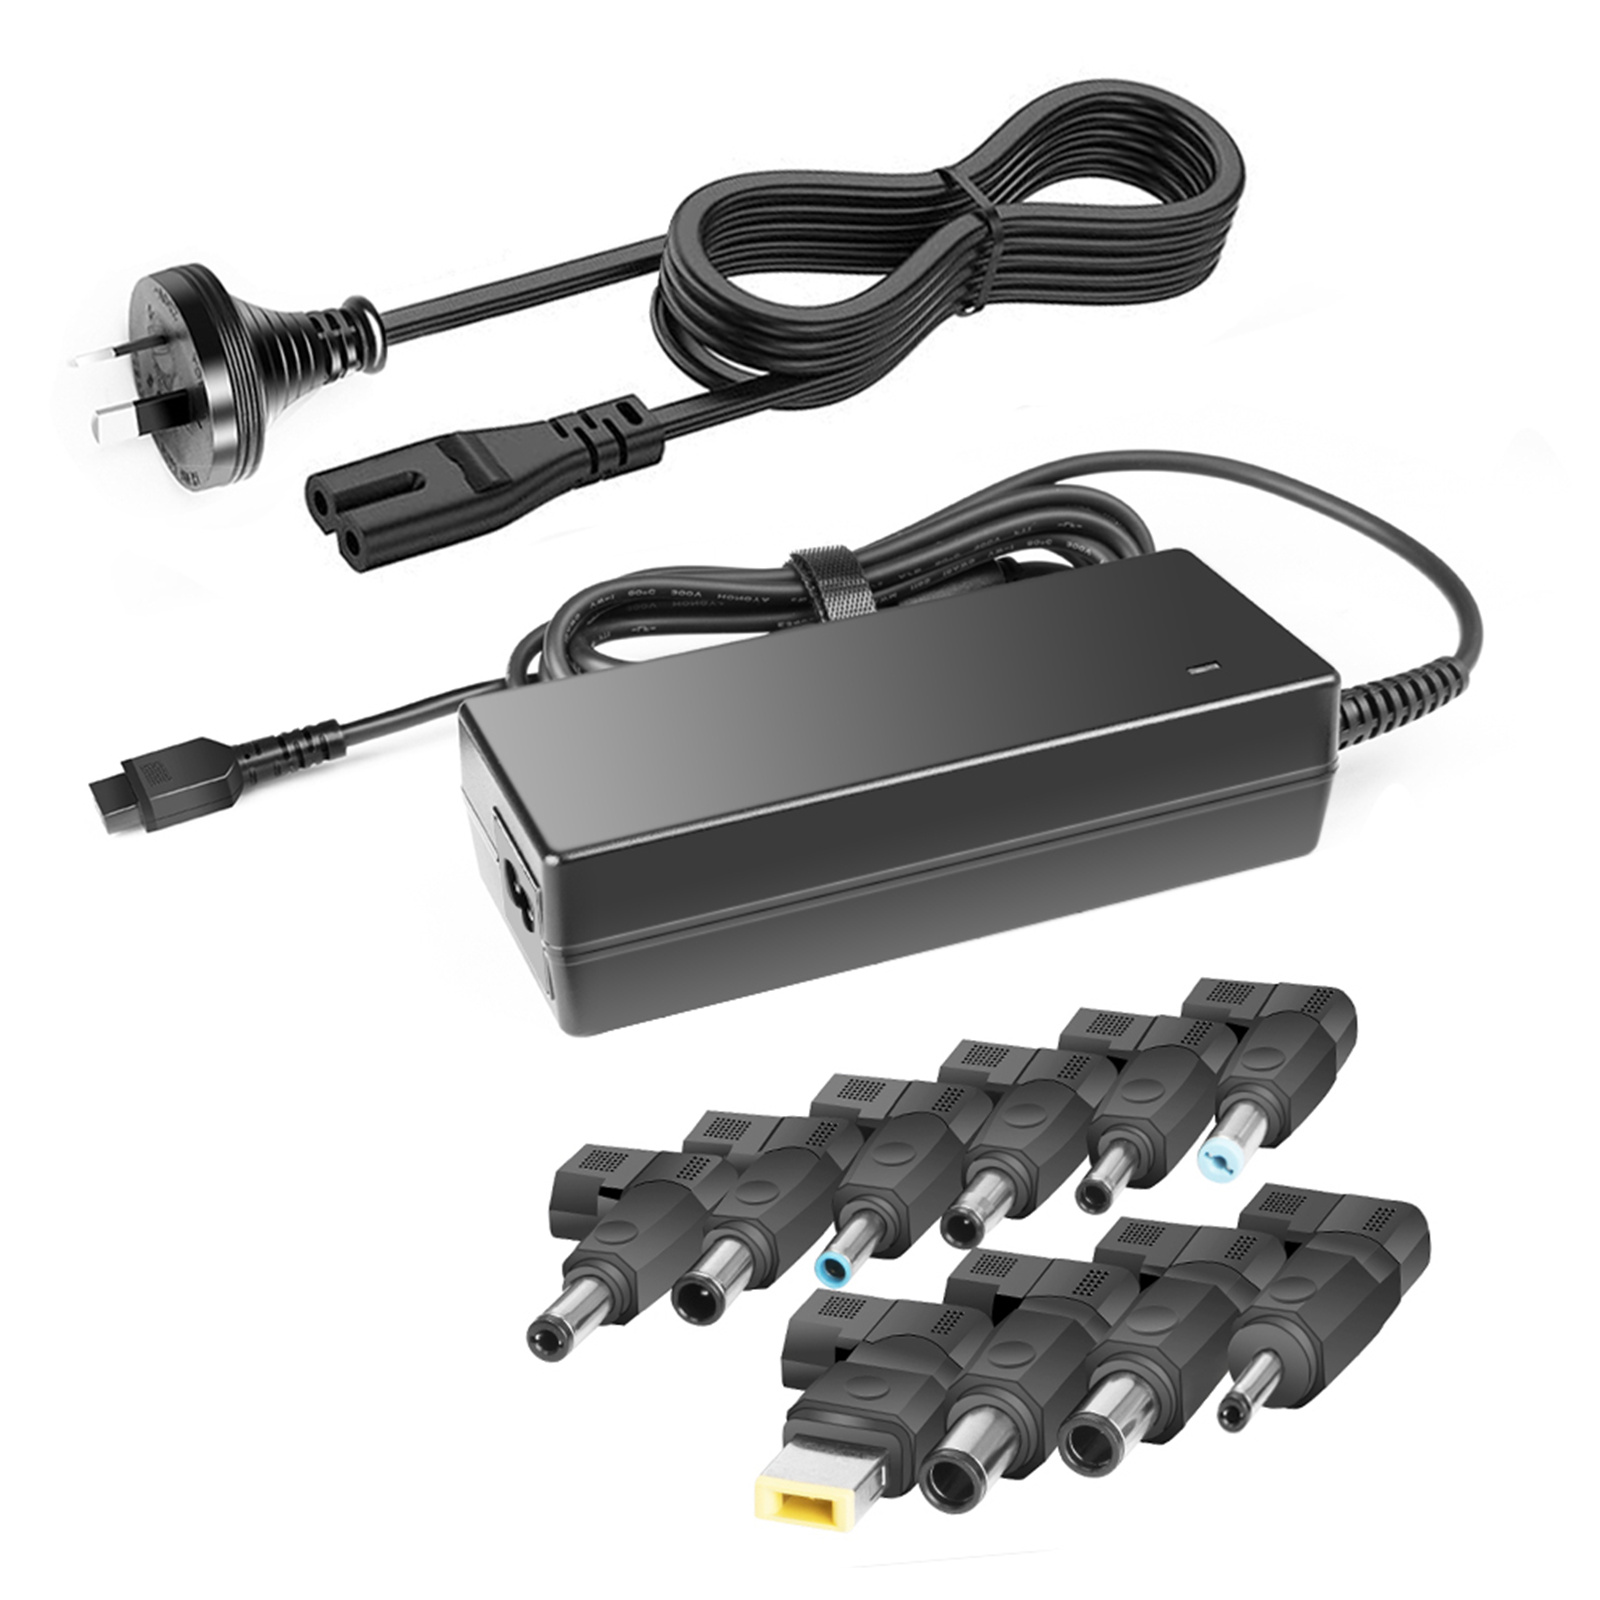 Buy the KFD Universal Laptop Charger 90W with 10 Tips Compatible for  Lenovo,... ( A159A-UN ) online - PBTech.com